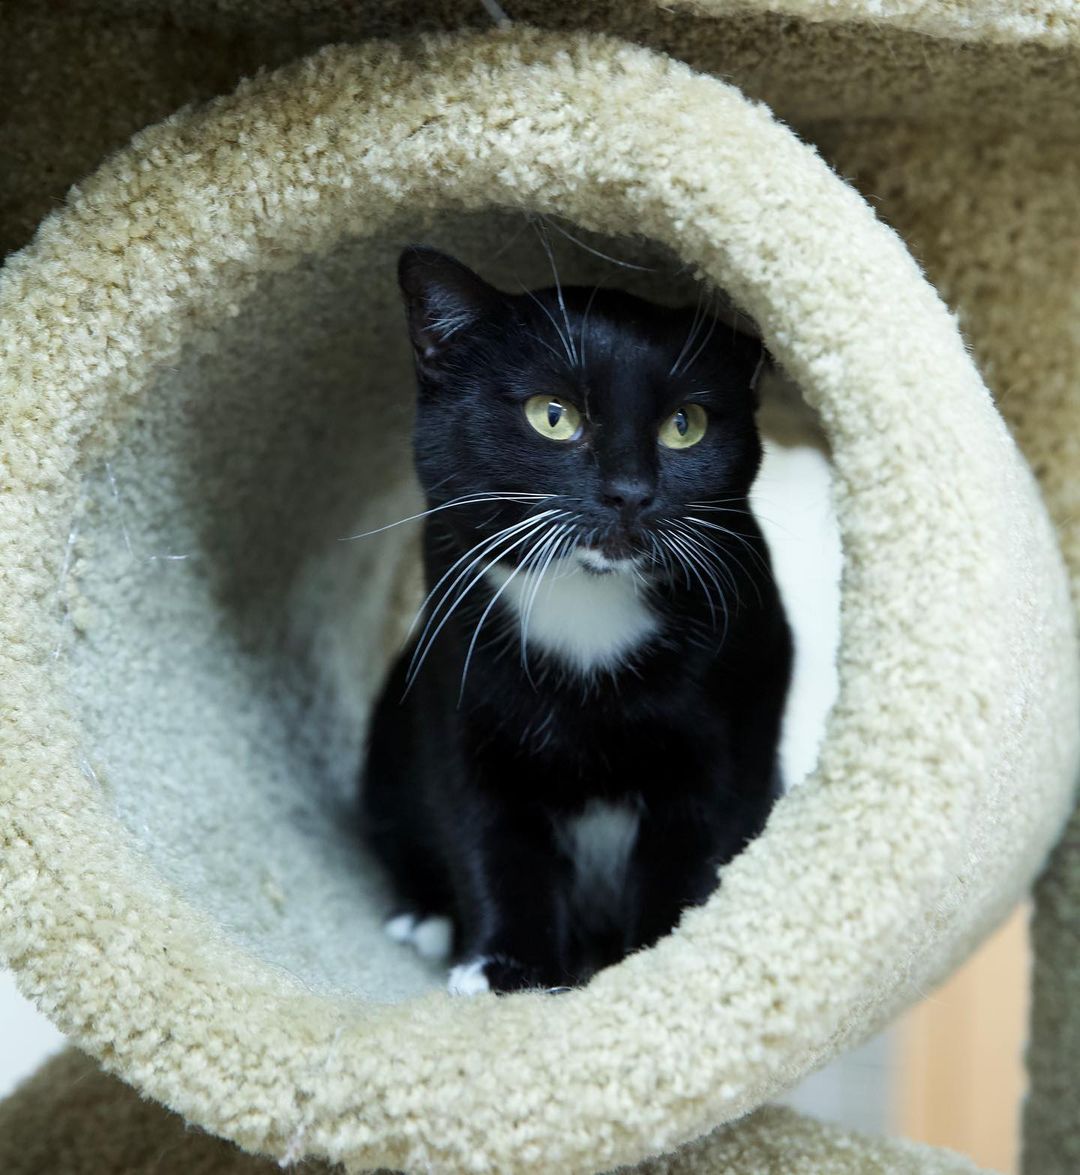 Meet Risa! ✨

Risa is sweet and petite, only 5.5 lbs and fully grown. She can be reserved at times, but when she feels comfortable she enjoys petting and playtime. She loves to be up in a cat tree looking out the window, so a home with lots of windows and nearby trees is a huge plus 🌳

Interested in Risa? Email adopt.cat@animalaidpdx.org for more information! 🐾
.
.
.
.
.
<a target='_blank' href='https://www.instagram.com/explore/tags/selfiesunday/'>#selfiesunday</a> <a target='_blank' href='https://www.instagram.com/explore/tags/sunday/'>#sunday</a>  <a target='_blank' href='https://www.instagram.com/explore/tags/instacat/'>#instacat</a> <a target='_blank' href='https://www.instagram.com/explore/tags/catsofinstagram/'>#catsofinstagram</a> <a target='_blank' href='https://www.instagram.com/explore/tags/catoftheday/'>#catoftheday</a> <a target='_blank' href='https://www.instagram.com/explore/tags/igcat/'>#igcat</a> <a target='_blank' href='https://www.instagram.com/explore/tags/rescuecat/'>#rescuecat</a> <a target='_blank' href='https://www.instagram.com/explore/tags/rescuecatsofinstagram/'>#rescuecatsofinstagram</a> <a target='_blank' href='https://www.instagram.com/explore/tags/cat/'>#cat</a> <a target='_blank' href='https://www.instagram.com/explore/tags/cats/'>#cats</a> <a target='_blank' href='https://www.instagram.com/explore/tags/rescuepets/'>#rescuepets</a> <a target='_blank' href='https://www.instagram.com/explore/tags/instapet/'>#instapet</a> <a target='_blank' href='https://www.instagram.com/explore/tags/igpets/'>#igpets</a> <a target='_blank' href='https://www.instagram.com/explore/tags/petsofinstagram/'>#petsofinstagram</a> <a target='_blank' href='https://www.instagram.com/explore/tags/kitty/'>#kitty</a> <a target='_blank' href='https://www.instagram.com/explore/tags/kittylove/'>#kittylove</a> <a target='_blank' href='https://www.instagram.com/explore/tags/animalrescue/'>#animalrescue</a> <a target='_blank' href='https://www.instagram.com/explore/tags/adoptdontshop/'>#adoptdontshop</a> <a target='_blank' href='https://www.instagram.com/explore/tags/goodkitty/'>#goodkitty</a> <a target='_blank' href='https://www.instagram.com/explore/tags/pnwcats/'>#pnwcats</a> <a target='_blank' href='https://www.instagram.com/explore/tags/pnwpets/'>#pnwpets</a> <a target='_blank' href='https://www.instagram.com/explore/tags/pdxcat/'>#pdxcat</a> <a target='_blank' href='https://www.instagram.com/explore/tags/pdxpets/'>#pdxpets</a> <a target='_blank' href='https://www.instagram.com/explore/tags/pdxadopt/'>#pdxadopt</a> <a target='_blank' href='https://www.instagram.com/explore/tags/pdx/'>#pdx</a> <a target='_blank' href='https://www.instagram.com/explore/tags/portlandia/'>#portlandia</a> <a target='_blank' href='https://www.instagram.com/explore/tags/igaddict/'>#igaddict</a> <a target='_blank' href='https://www.instagram.com/explore/tags/instadaily/'>#instadaily</a> <a target='_blank' href='https://www.instagram.com/explore/tags/catsofig/'>#catsofig</a>